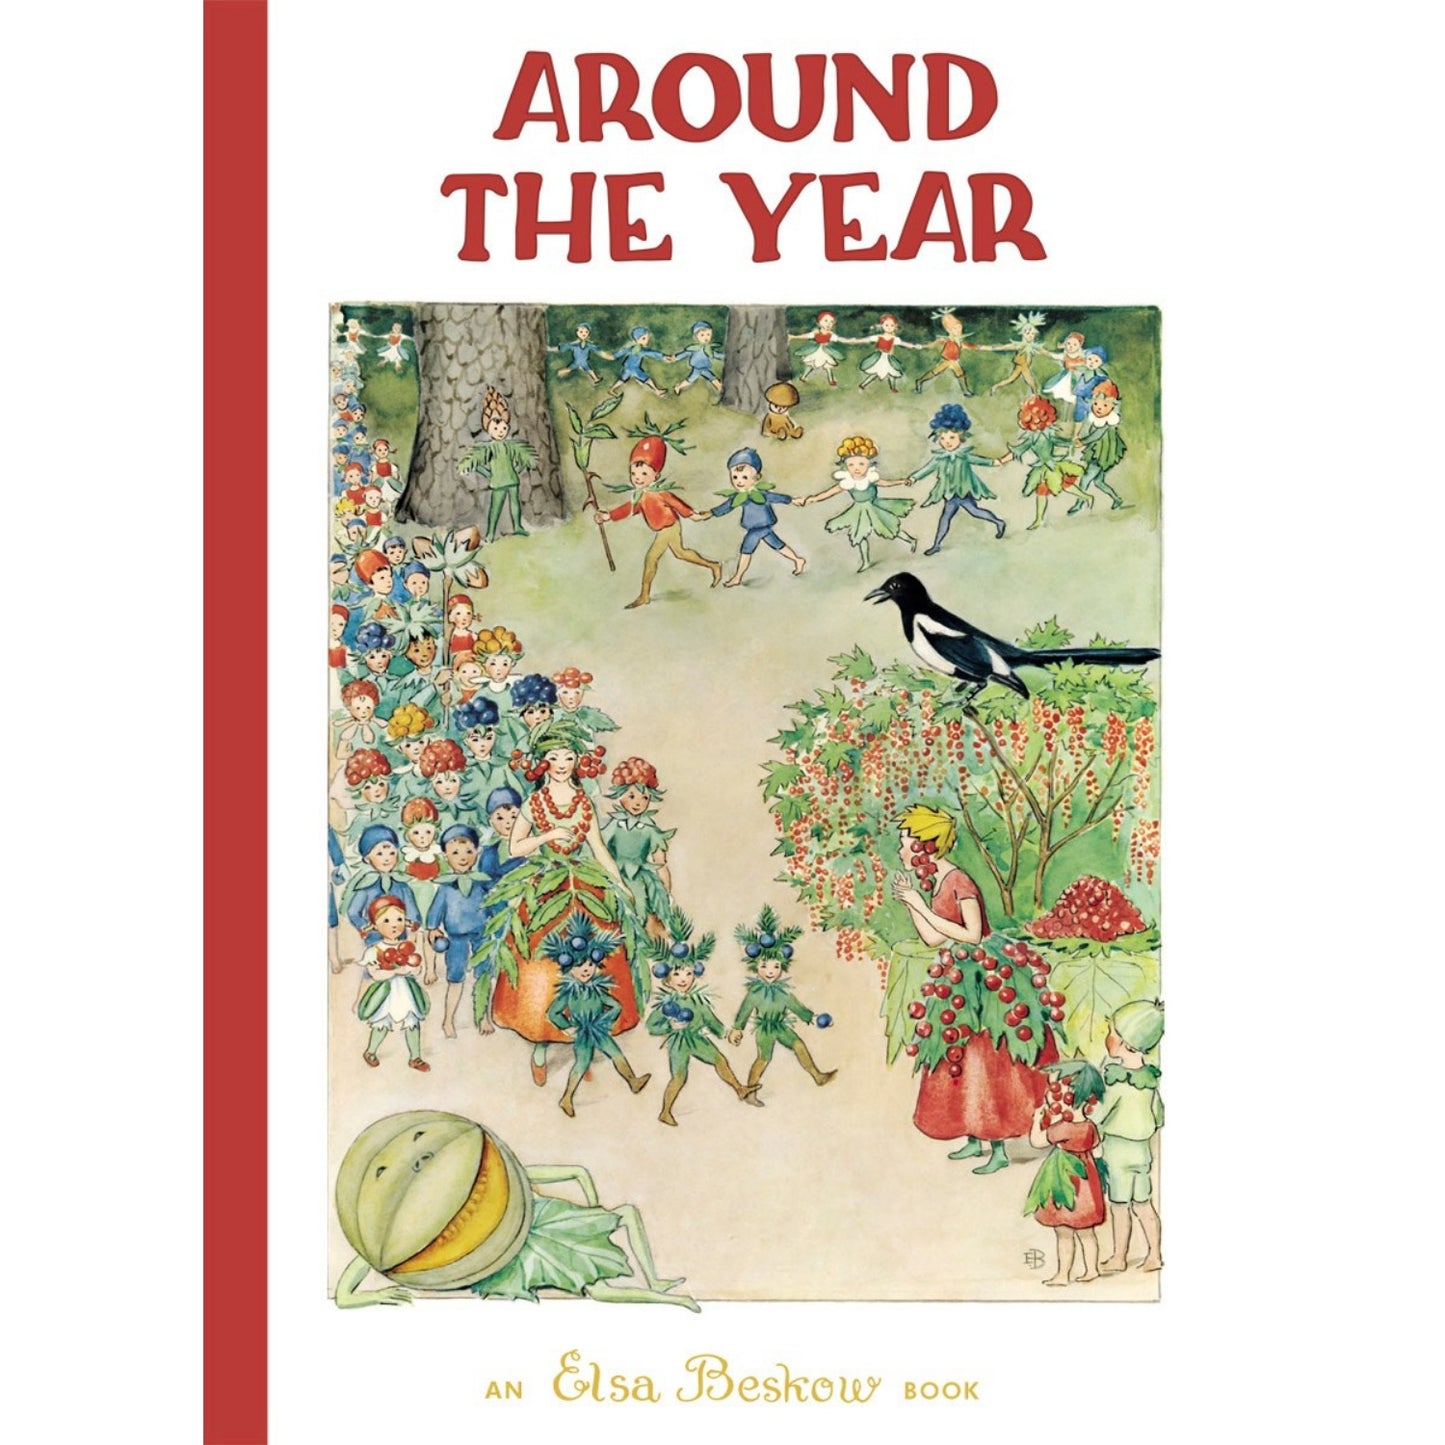 Around the Year | Elsa Beskow | Hardcover | Tales & Myths for Children